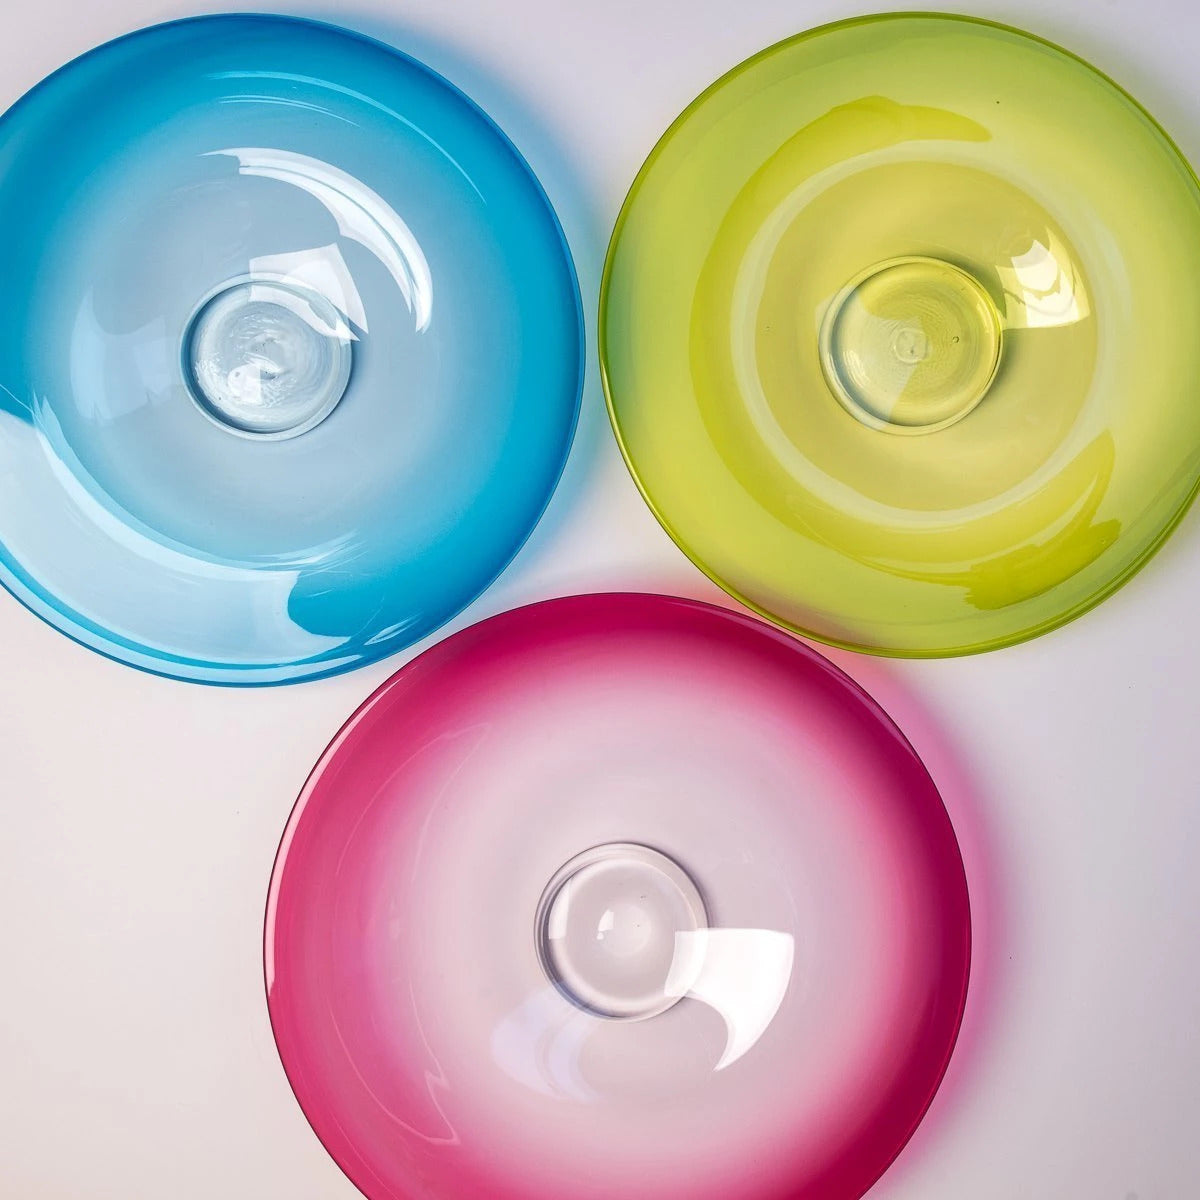 Colourful Tableware | Australian Made | Twilight Series - CoCo Contemporary Connoisseur Gift Store